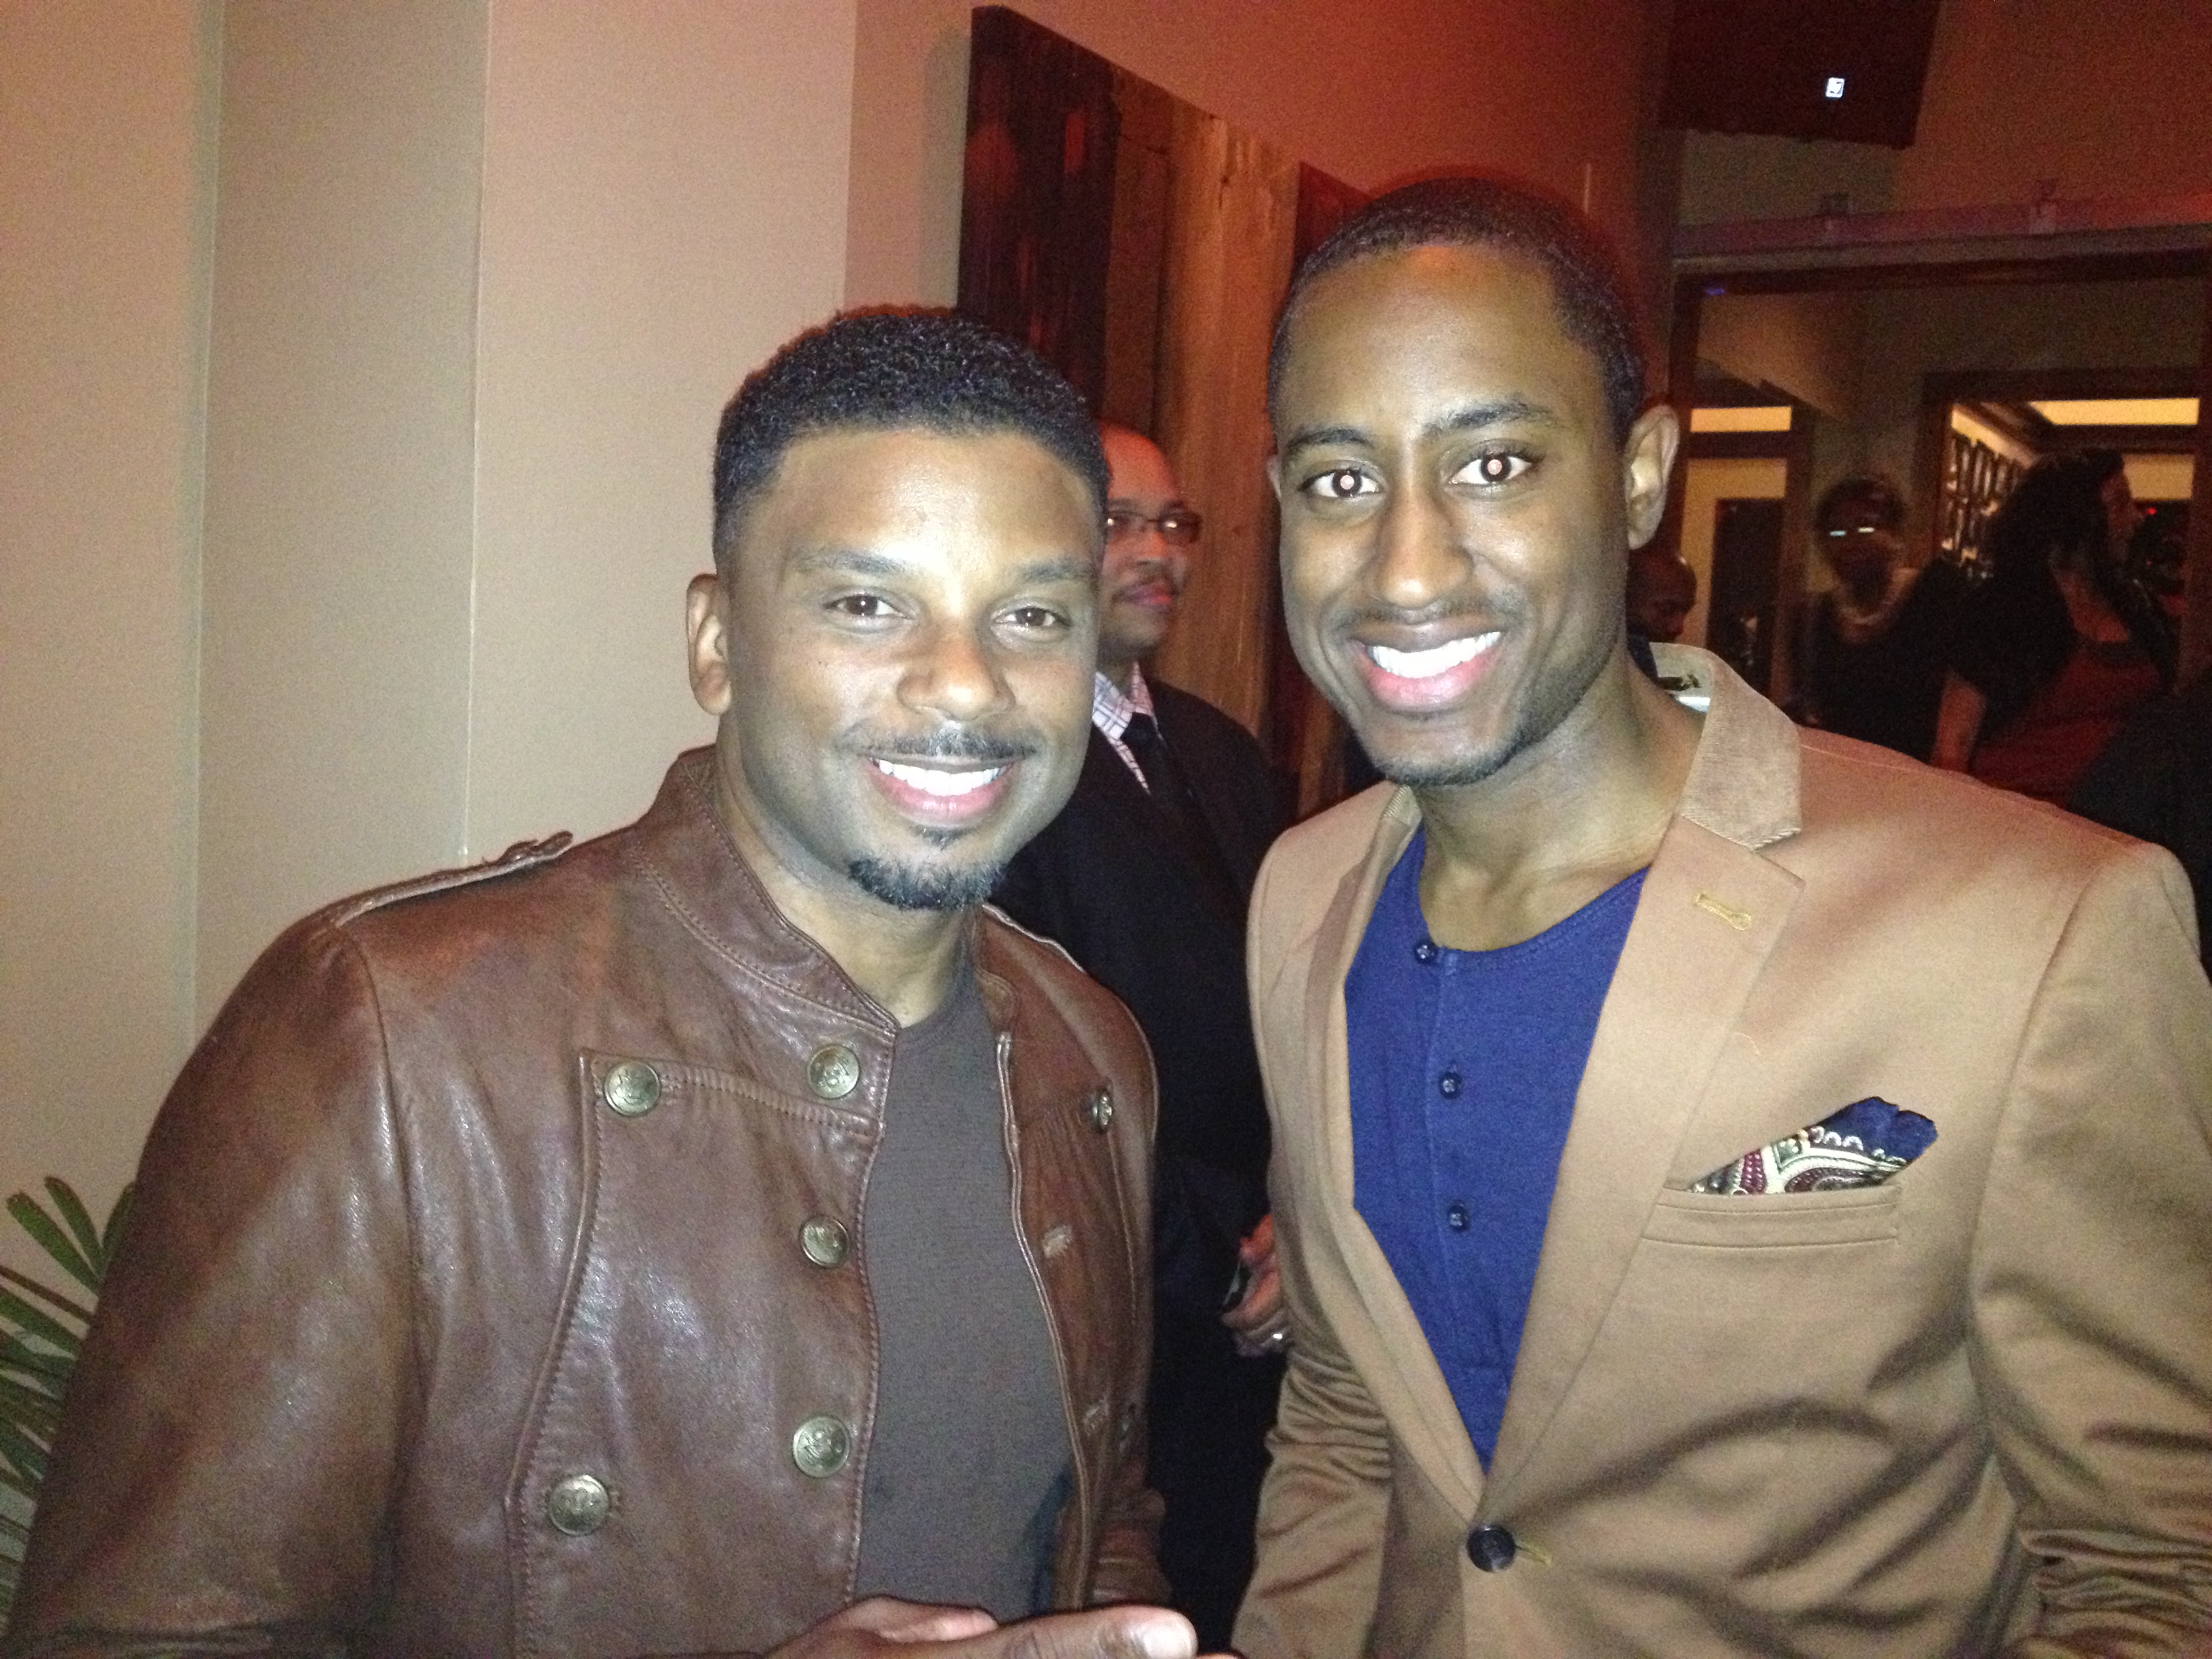 Montrel Miller and Carl Anthony Payne II at the Studio 11 Films premiere party